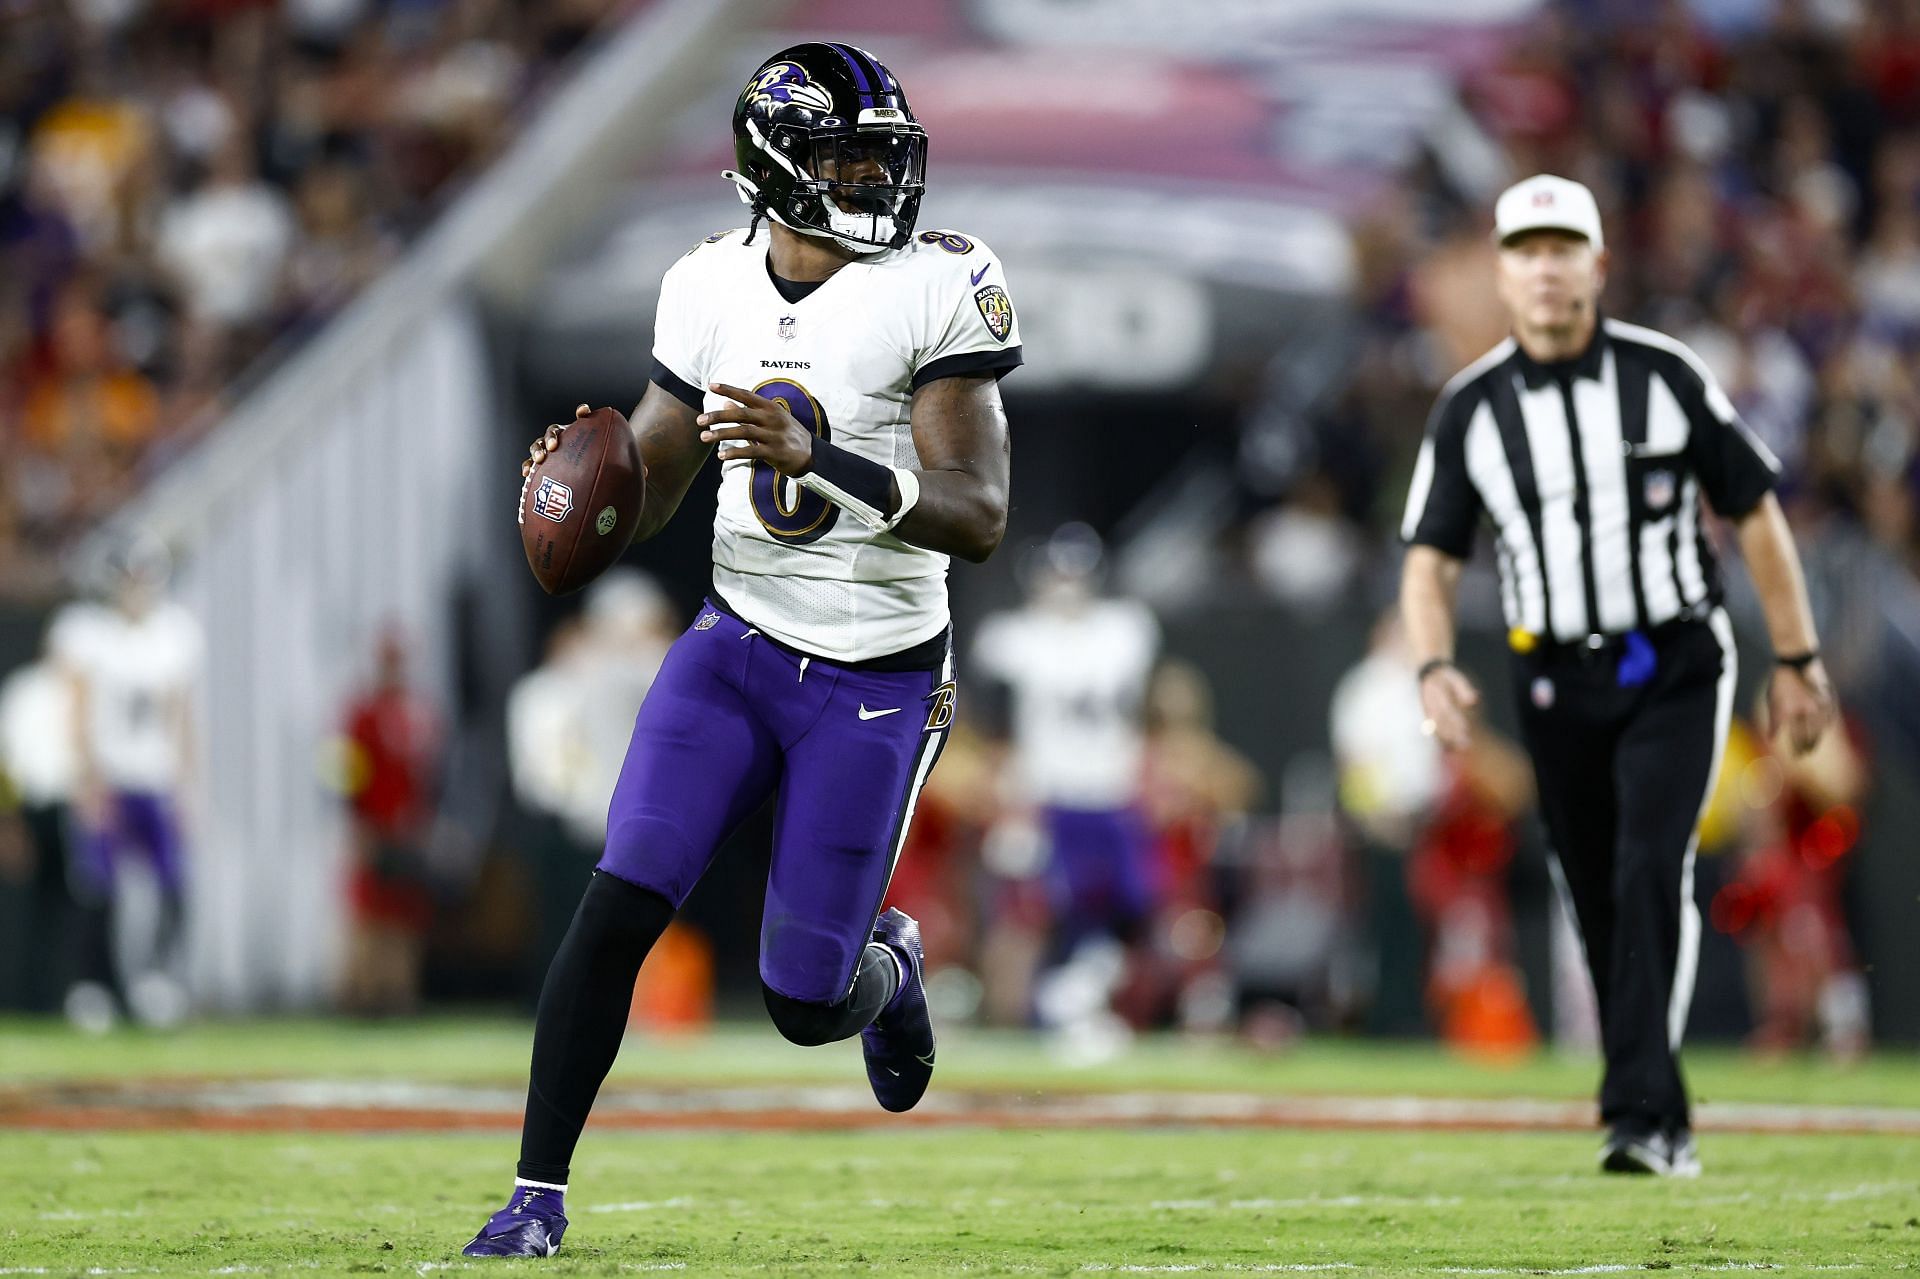 Lamar Jackson gets nonexclusive franchise tag from Ravens